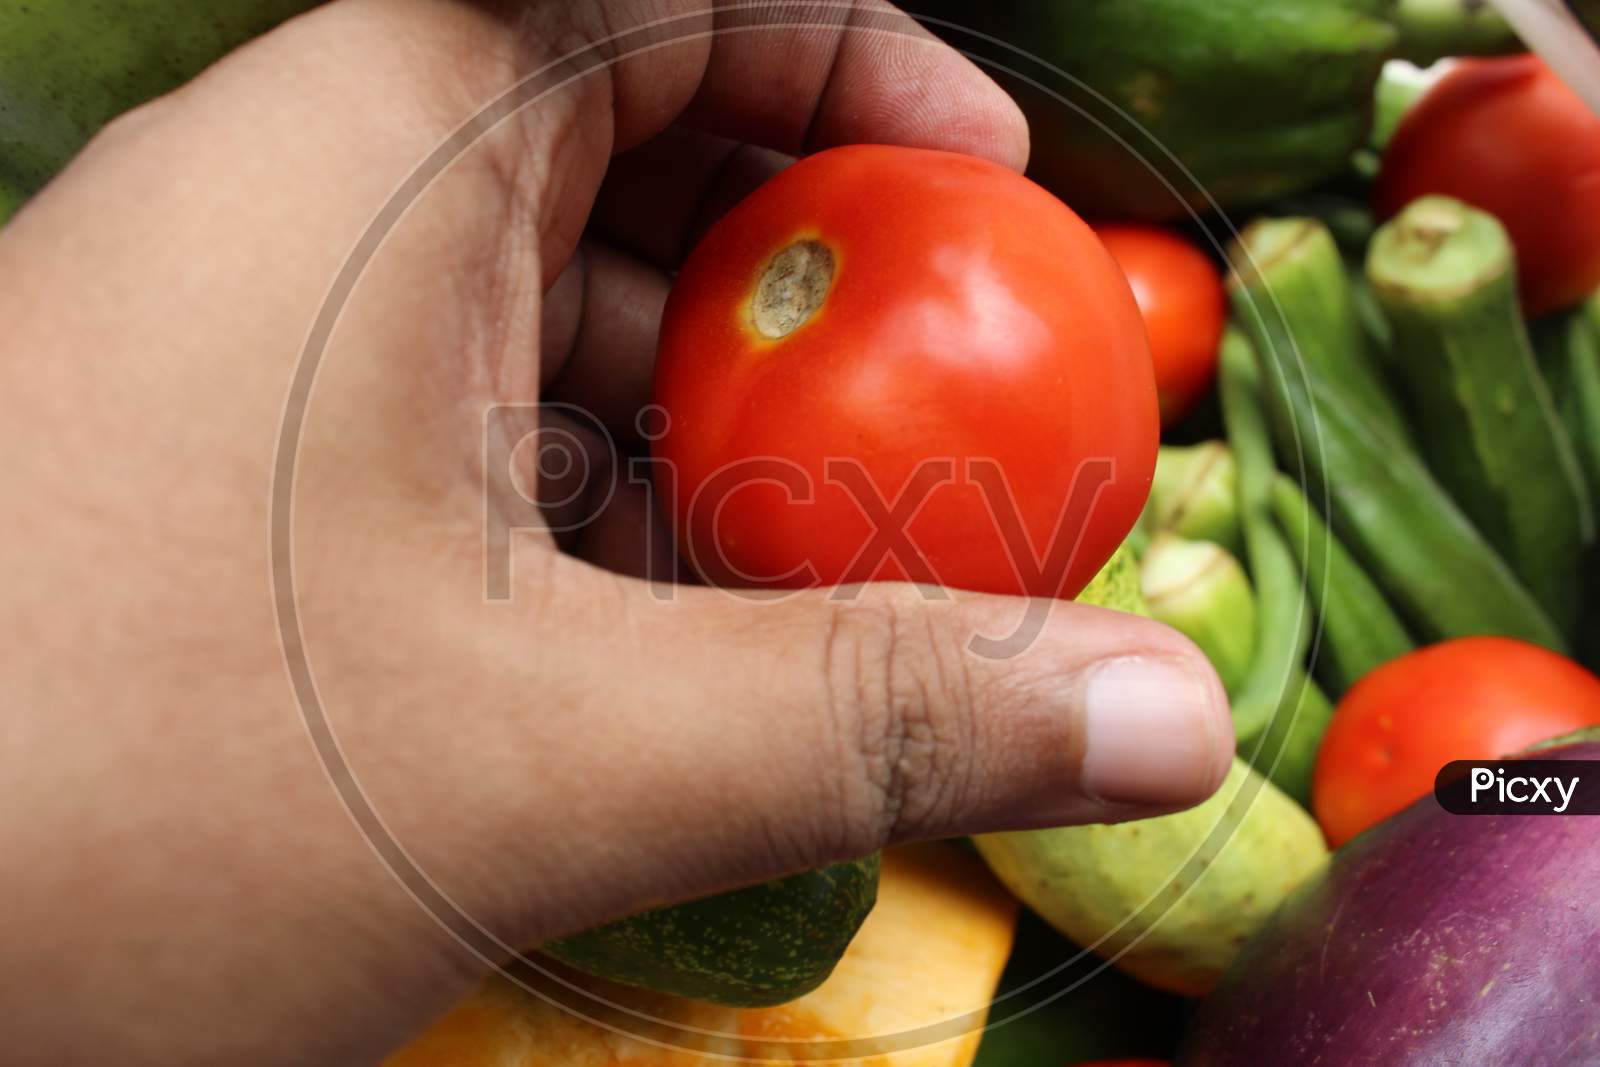 Hand holding red tomato and various organic vegetables background for diet.